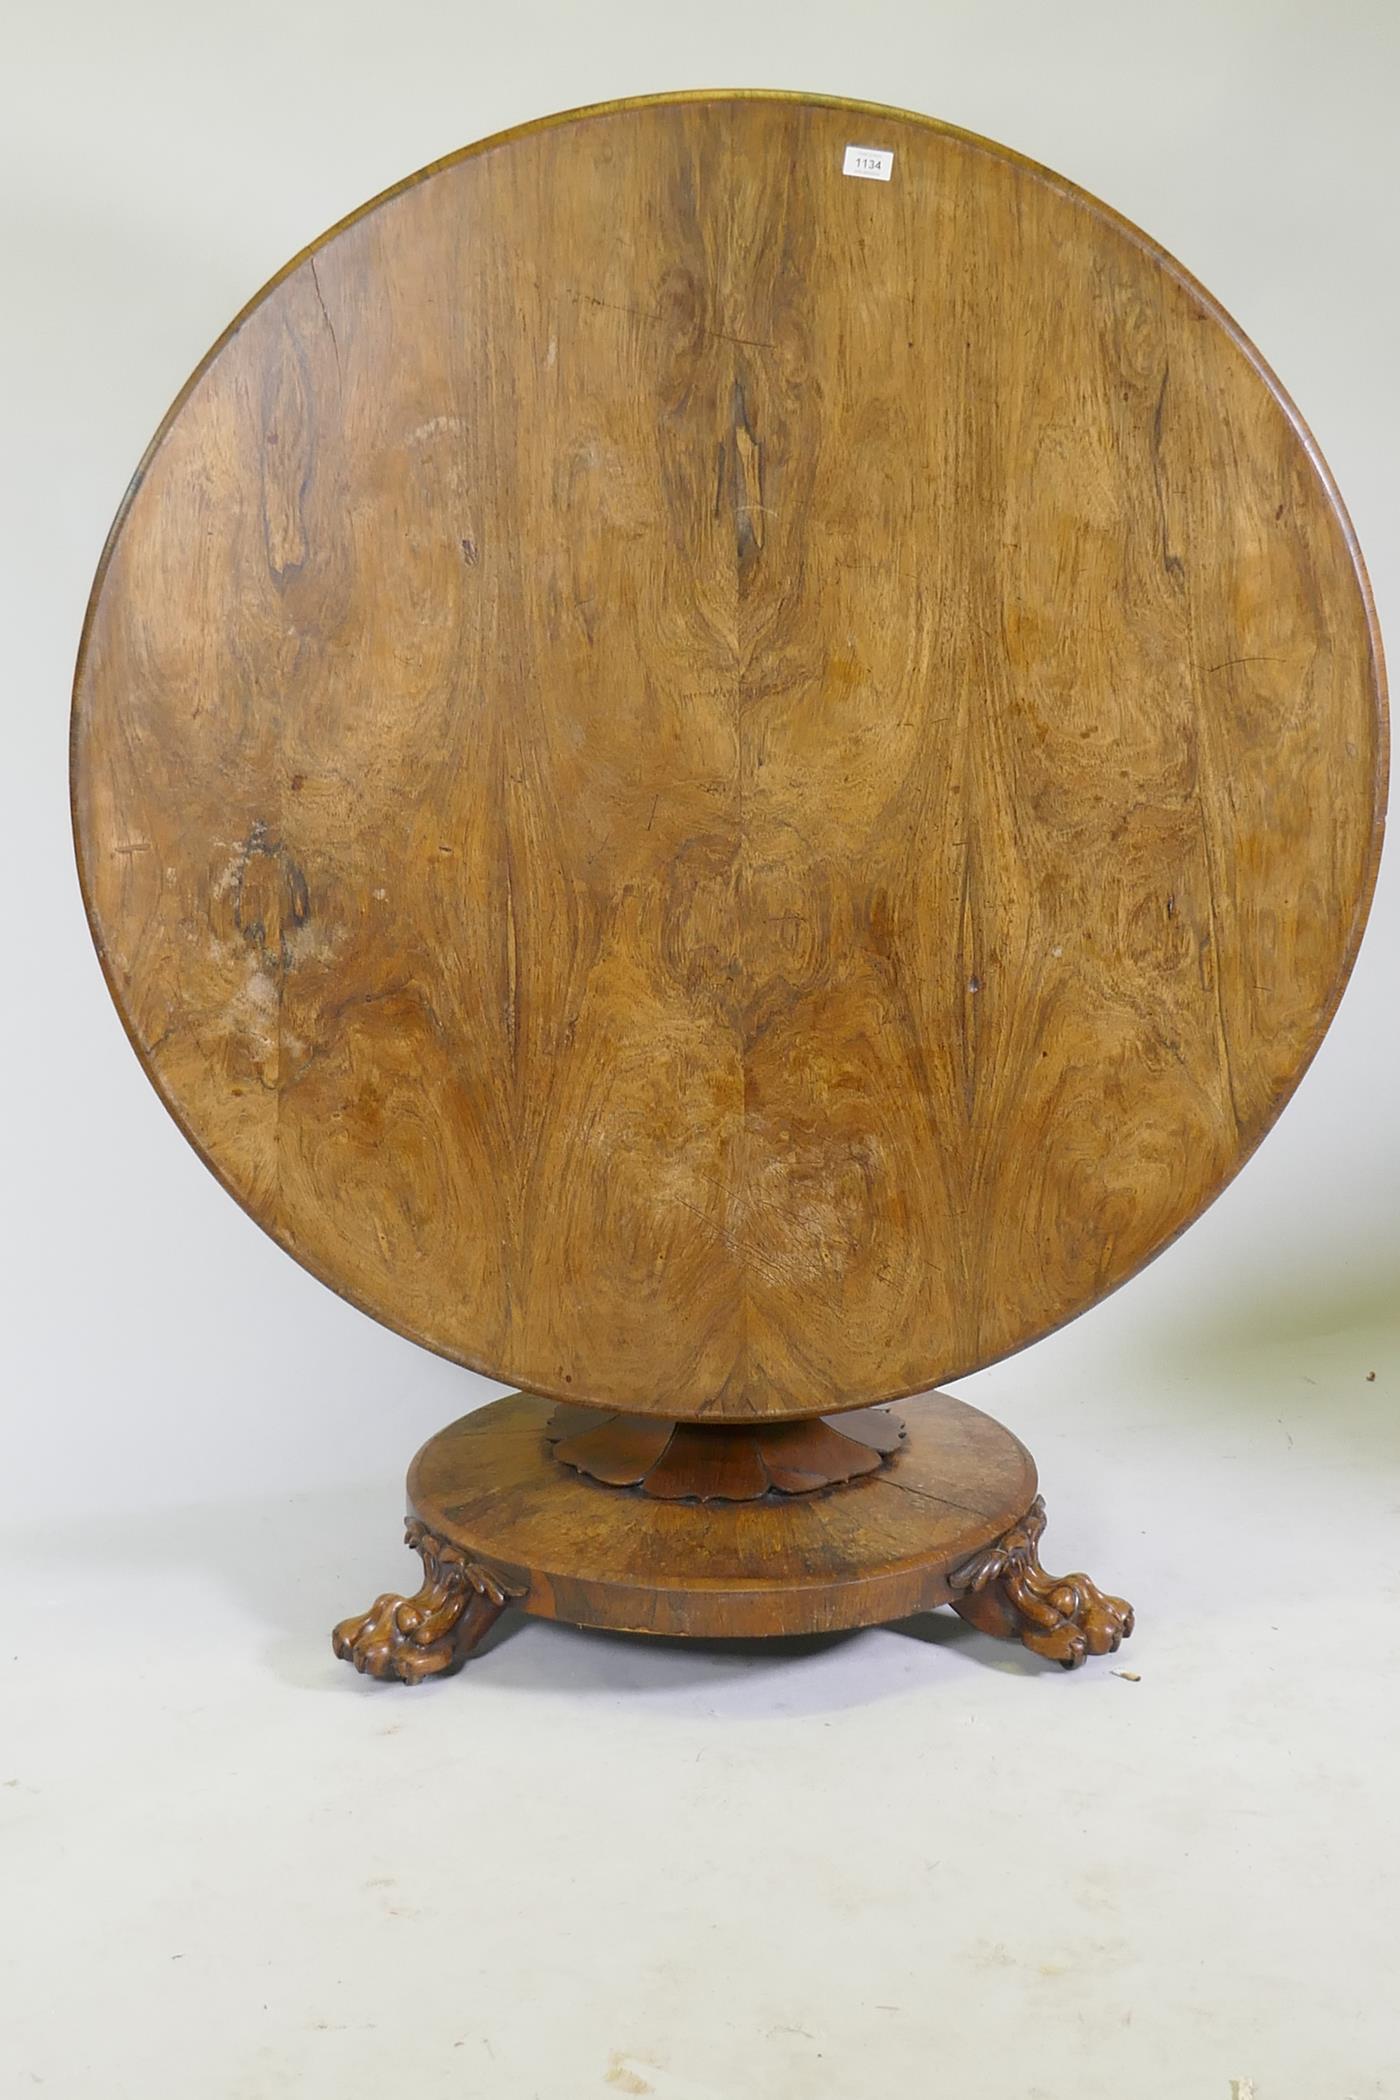 A C19th rosewood tilt top breakfast table, raised on a shaped column with carved detail and platform - Image 5 of 7